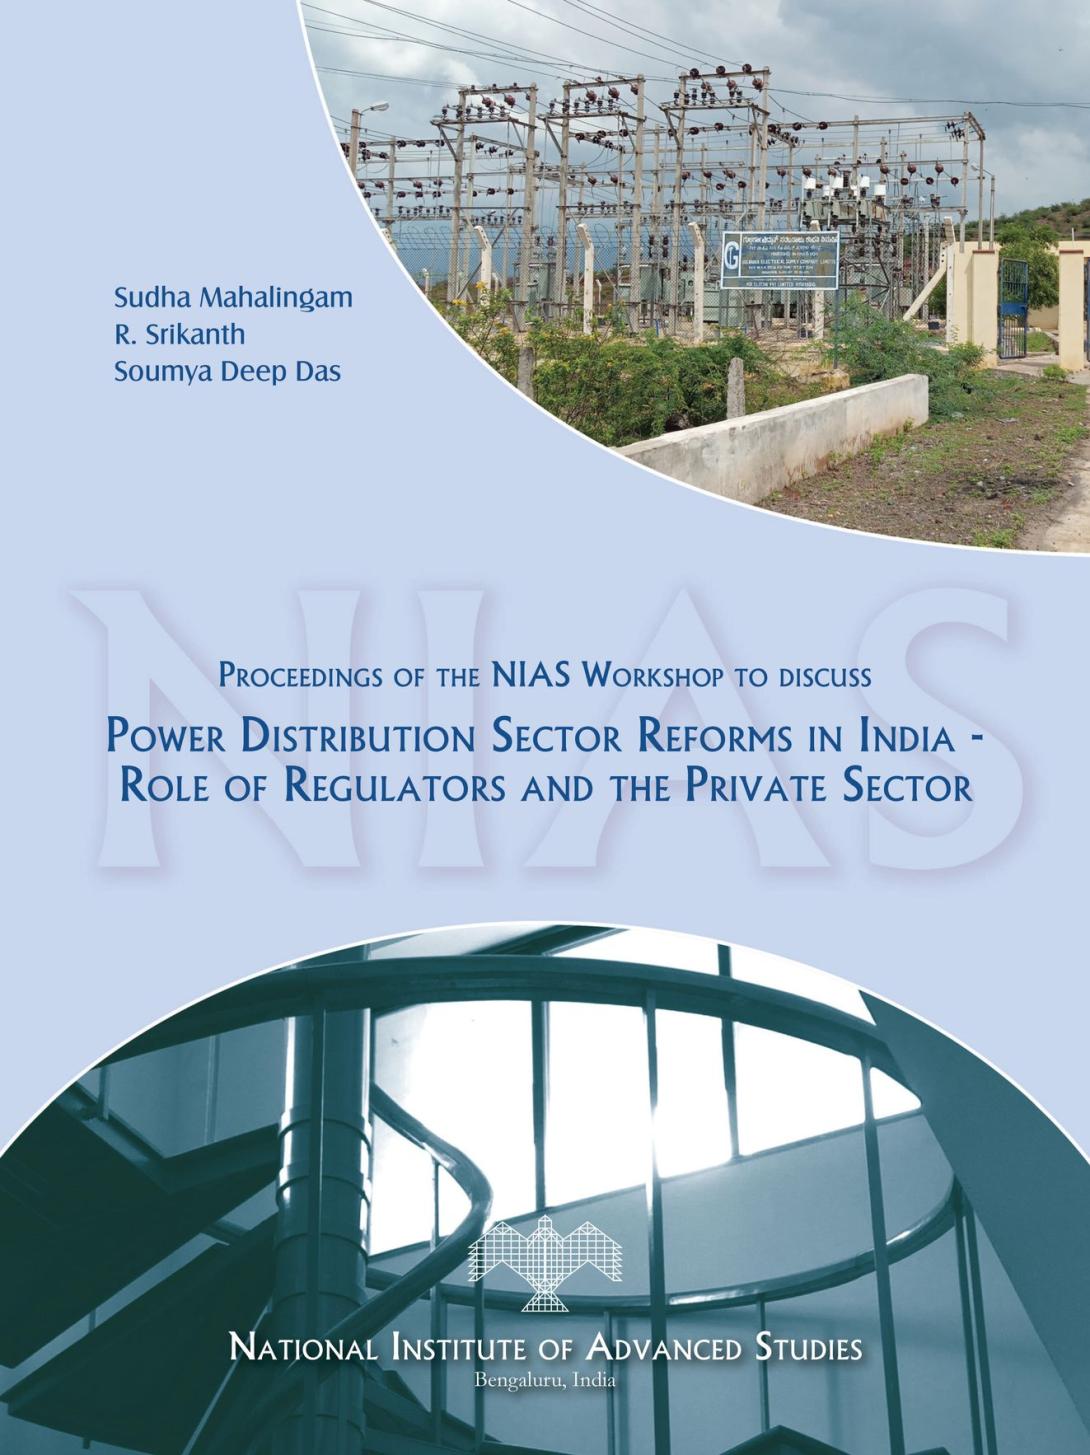 Power Distribution Sector Reforms in India: Role of Regulators and The Private Sector